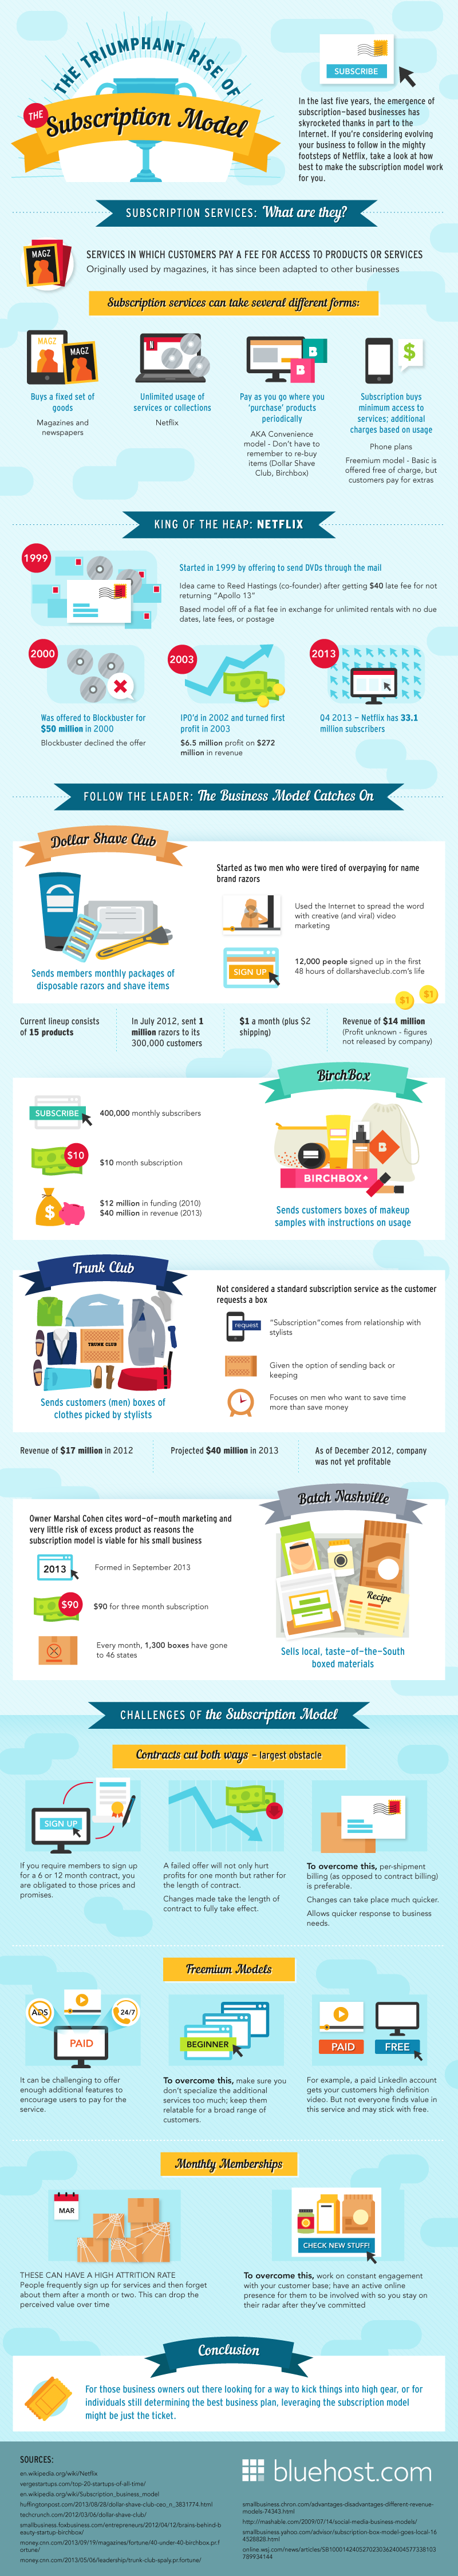 The Triumphant Rise of the Subscription Model - #Infographic